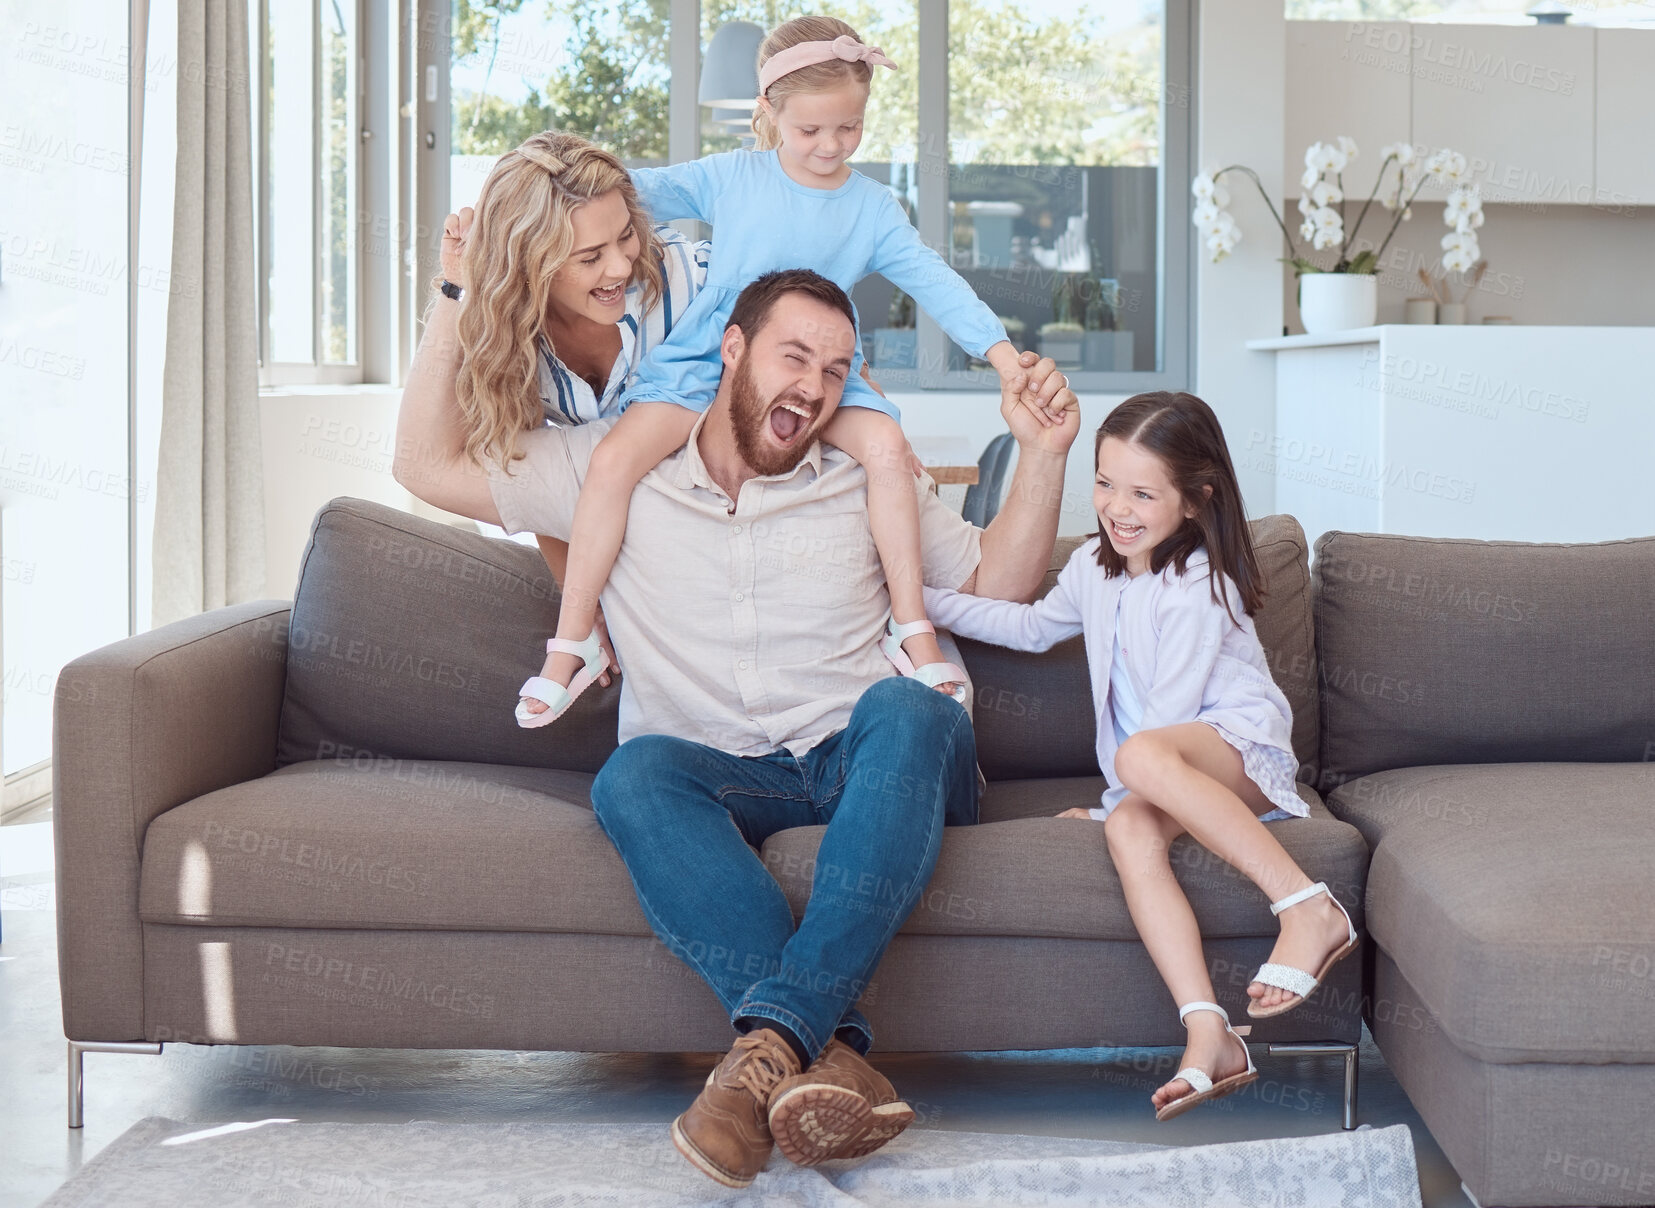 Buy stock photo Happy young caucasian family sitting on a sofa in the living room at home and playing. Adorable little girls and their mother teasing their father while bonding during the weekend. Playful parents